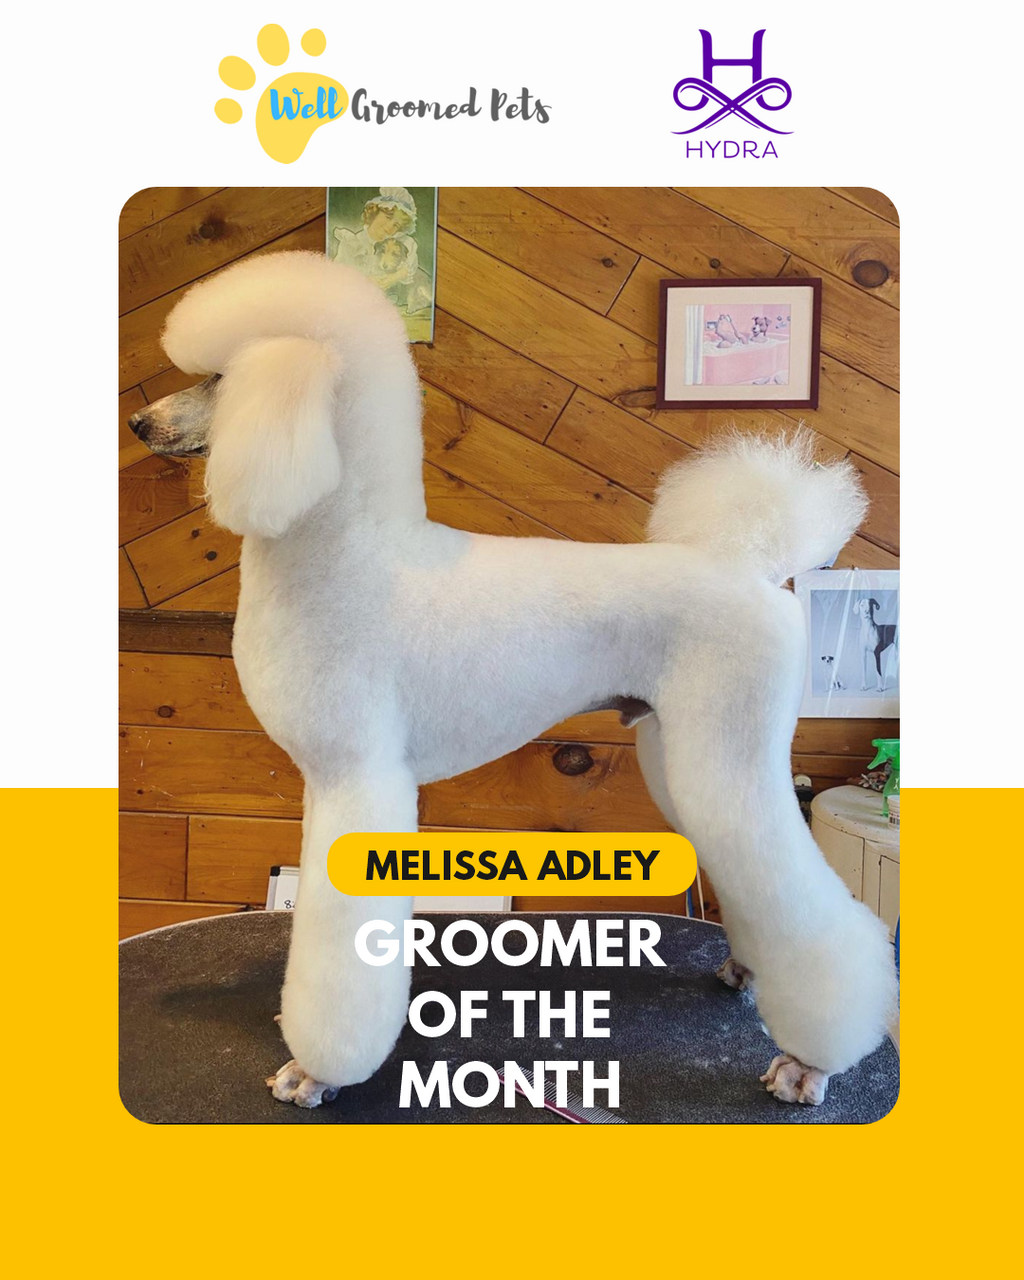 Congratulations to Melissa Adley Winner of the Well Groomed Groomer of the month contest